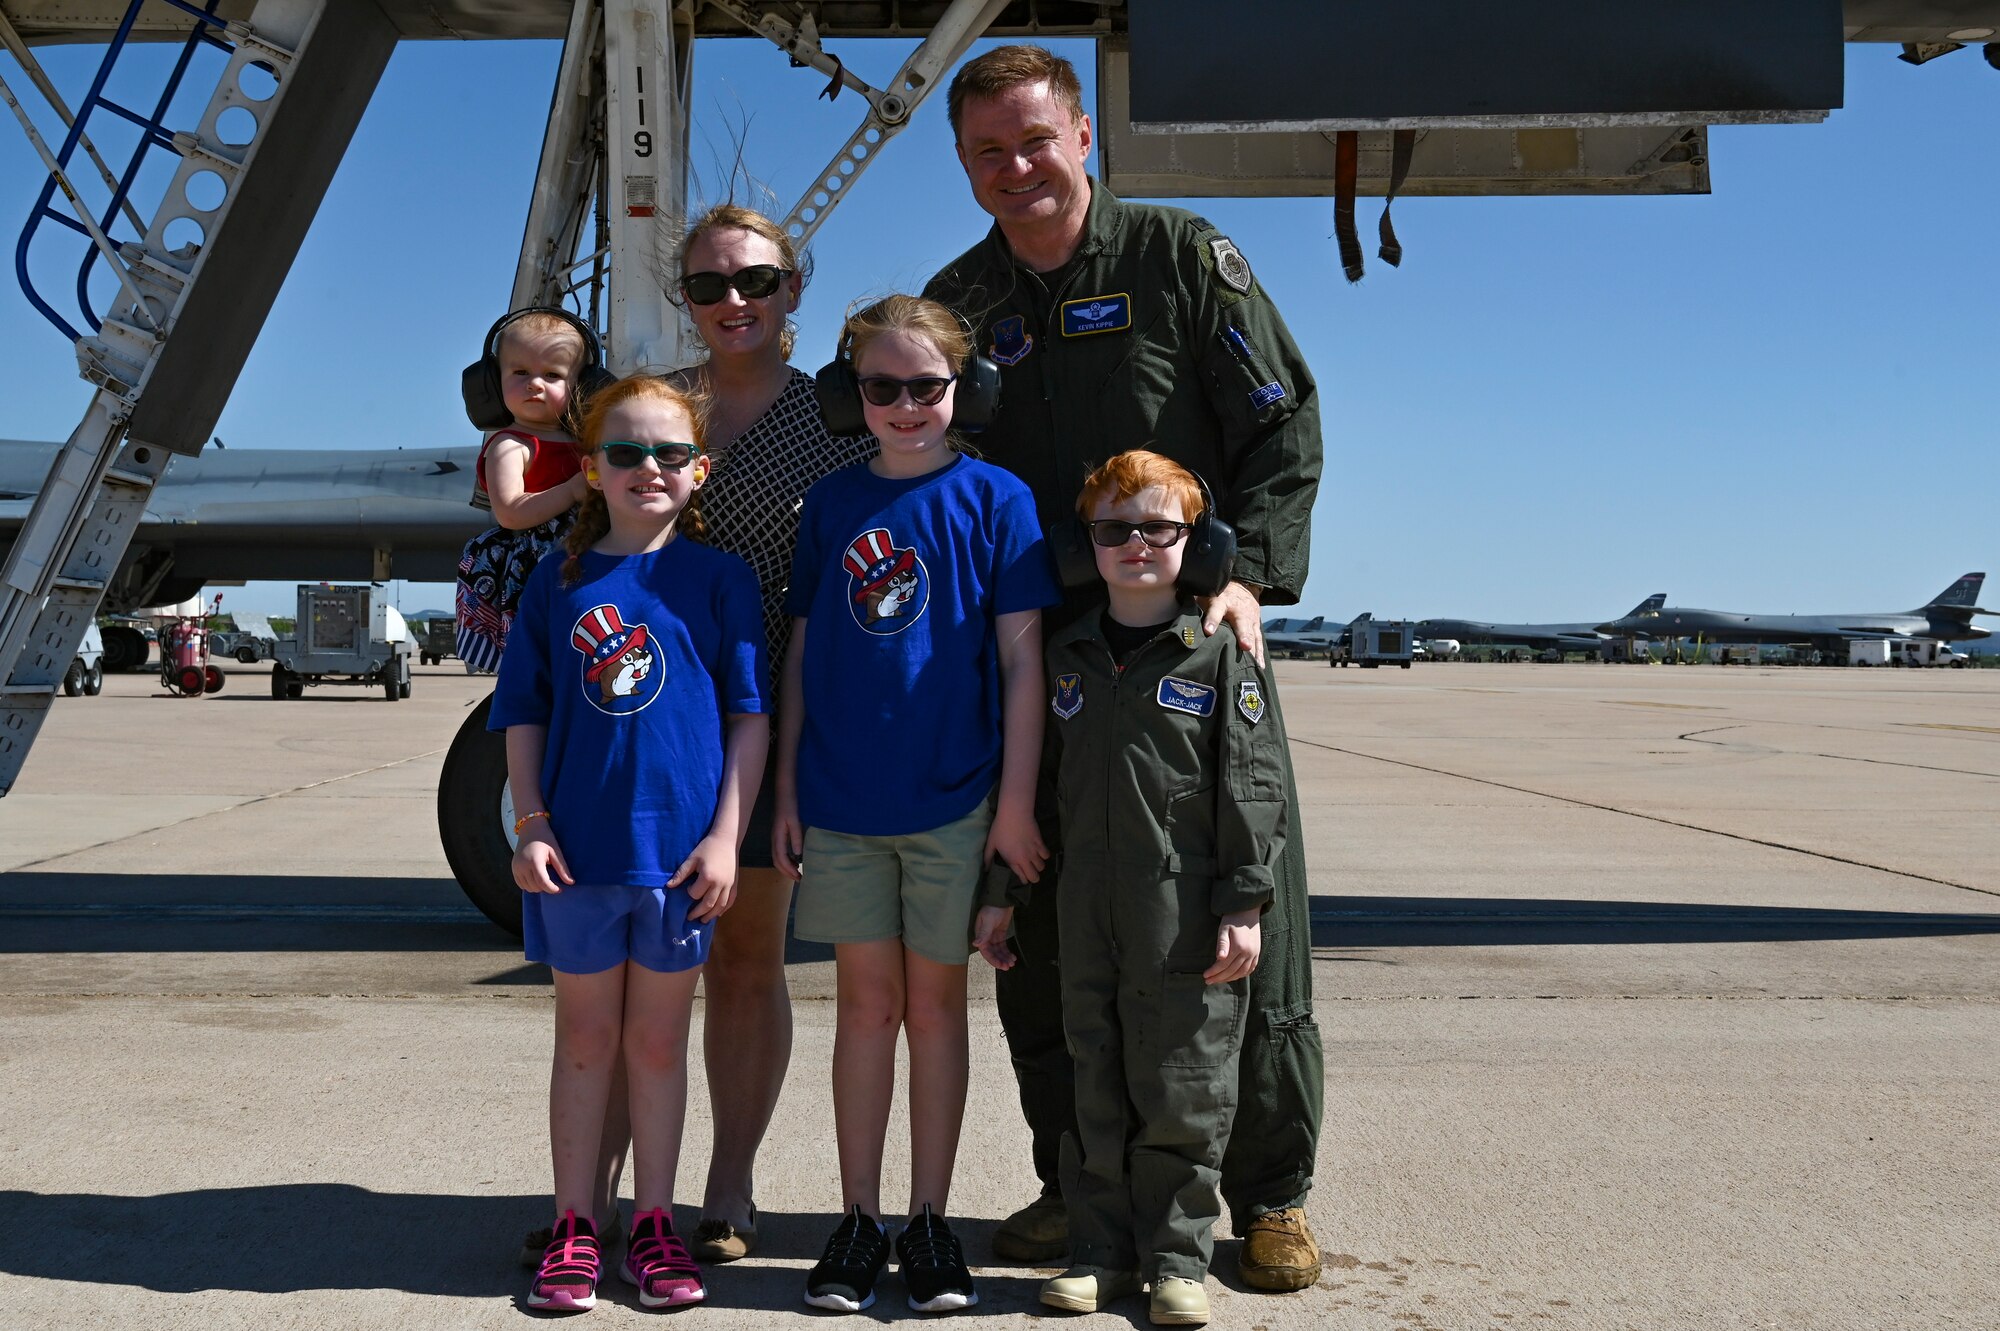 The Kippie family poses for a photo at Dyess Air Force Base, Texas, June 29, 2023. U.S. Air Force Col. Kevin Kippie, 7th Bomb Wing vice commander, served at Dyess from June 11, 2021, to June 16, 2023. While at Dyess, Kippie was committed to excellence as he fostered financial innovation and proposals for the installation, created a Wing Welcome Center for new Airmen and worked in integrated teams to action the wing’s fiscal efforts. (U.S. Air Force photo by Airman 1st Class Emma Anderson)